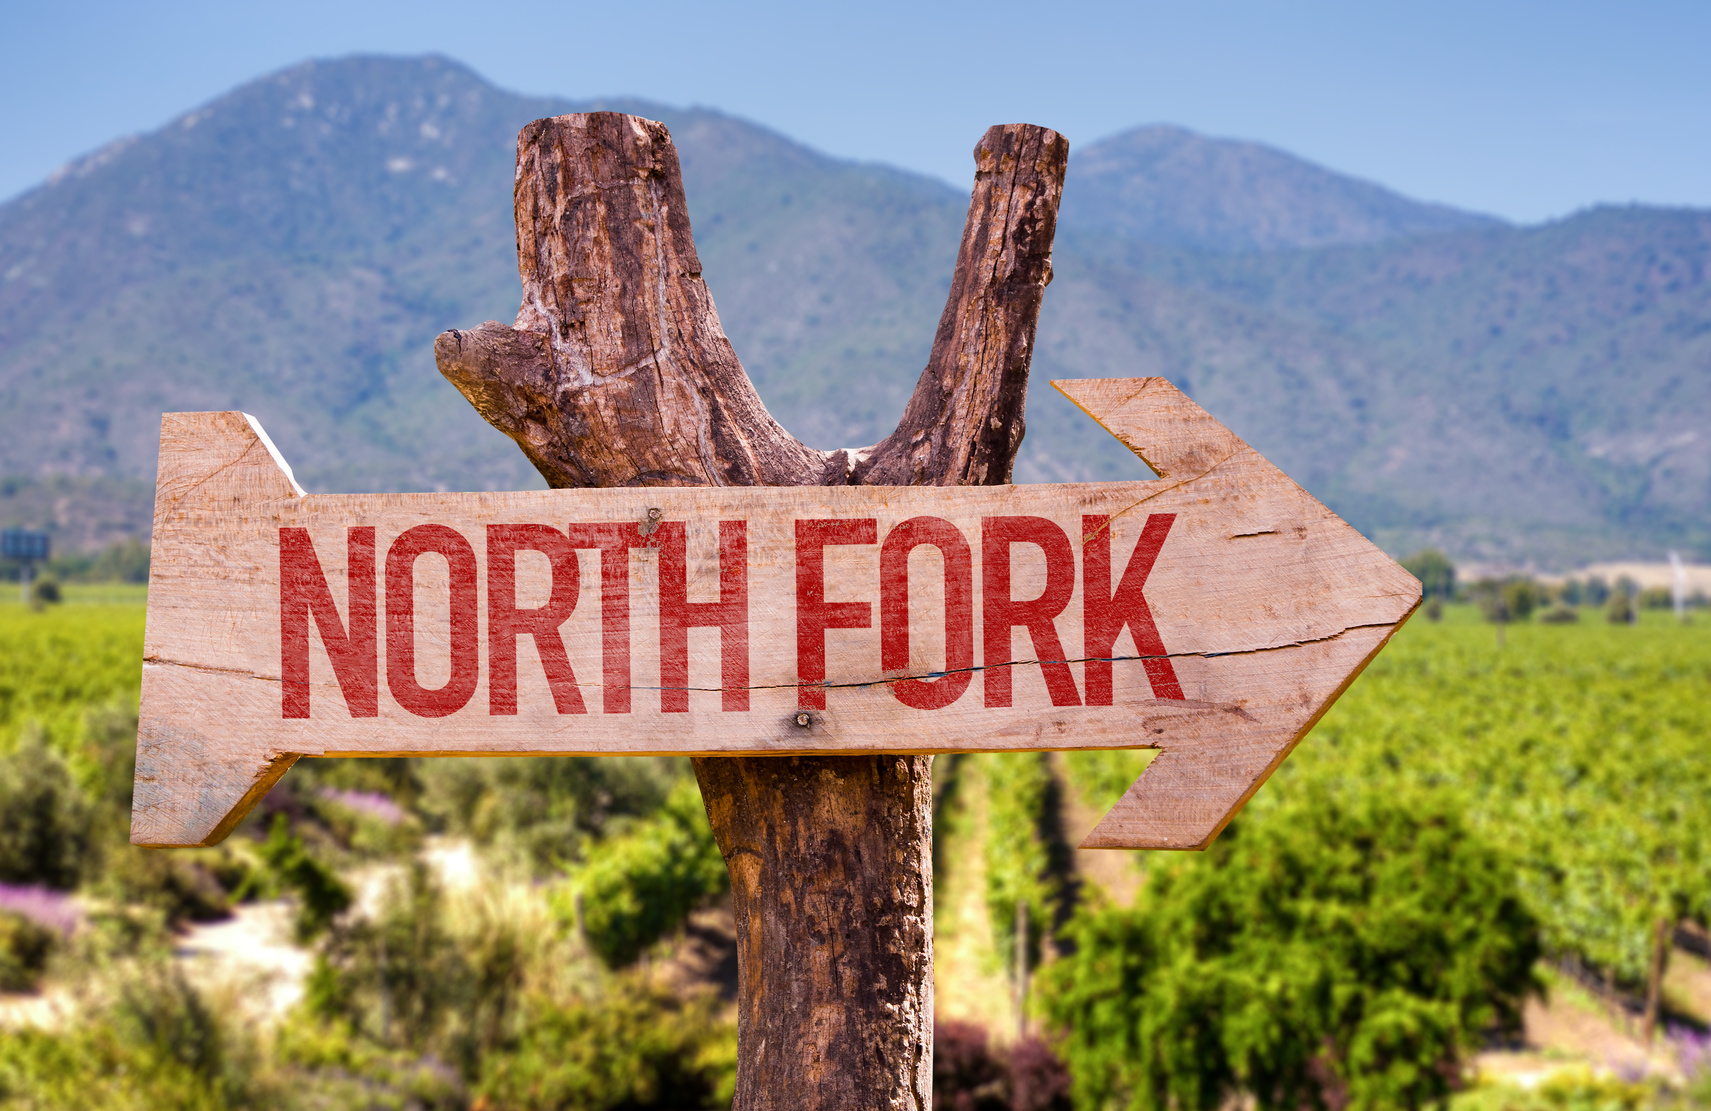 Spend A Day Enjoying These Local North Fork Wineries!